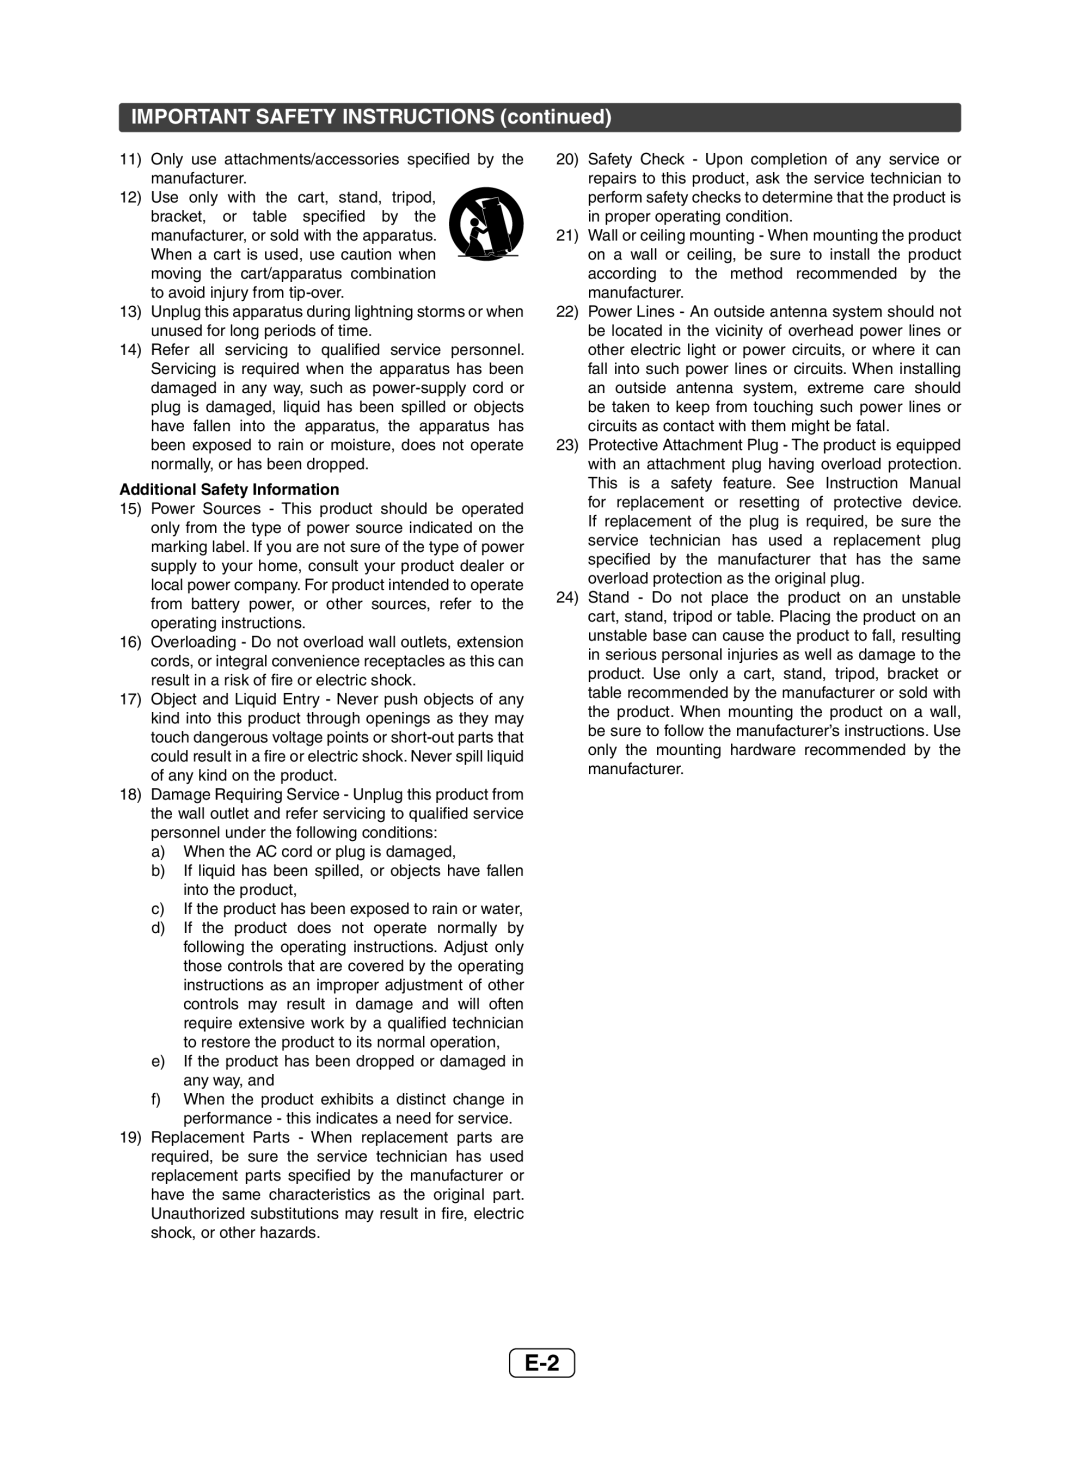 Sharp XL-DH229 operation manual IMPORTANT SAFETY INSTRUCTIONS continued 